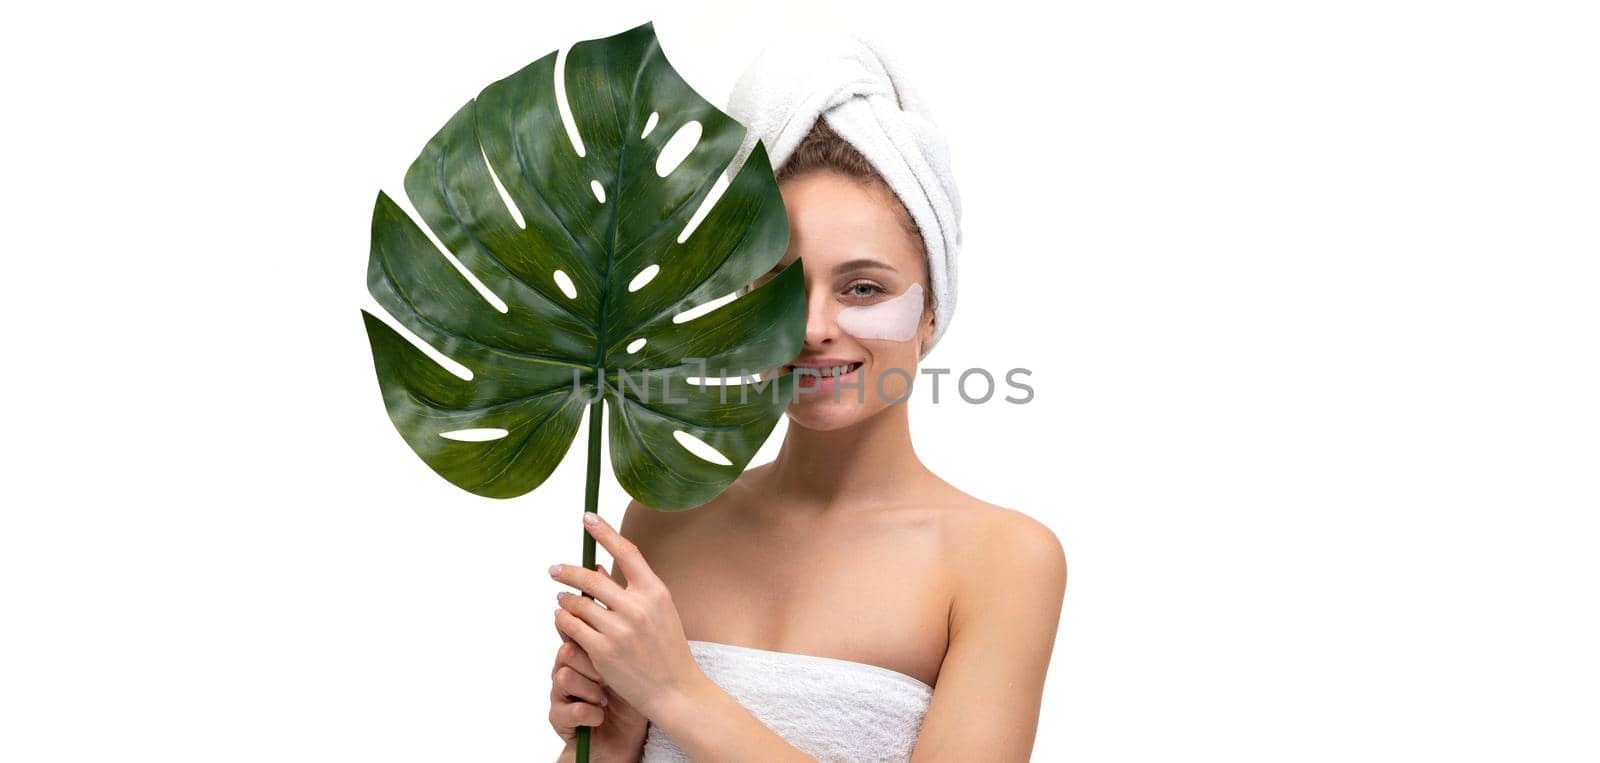 portrait of a young woman with well-groomed skin after a shower on a white background with a palm leaf in her hands.